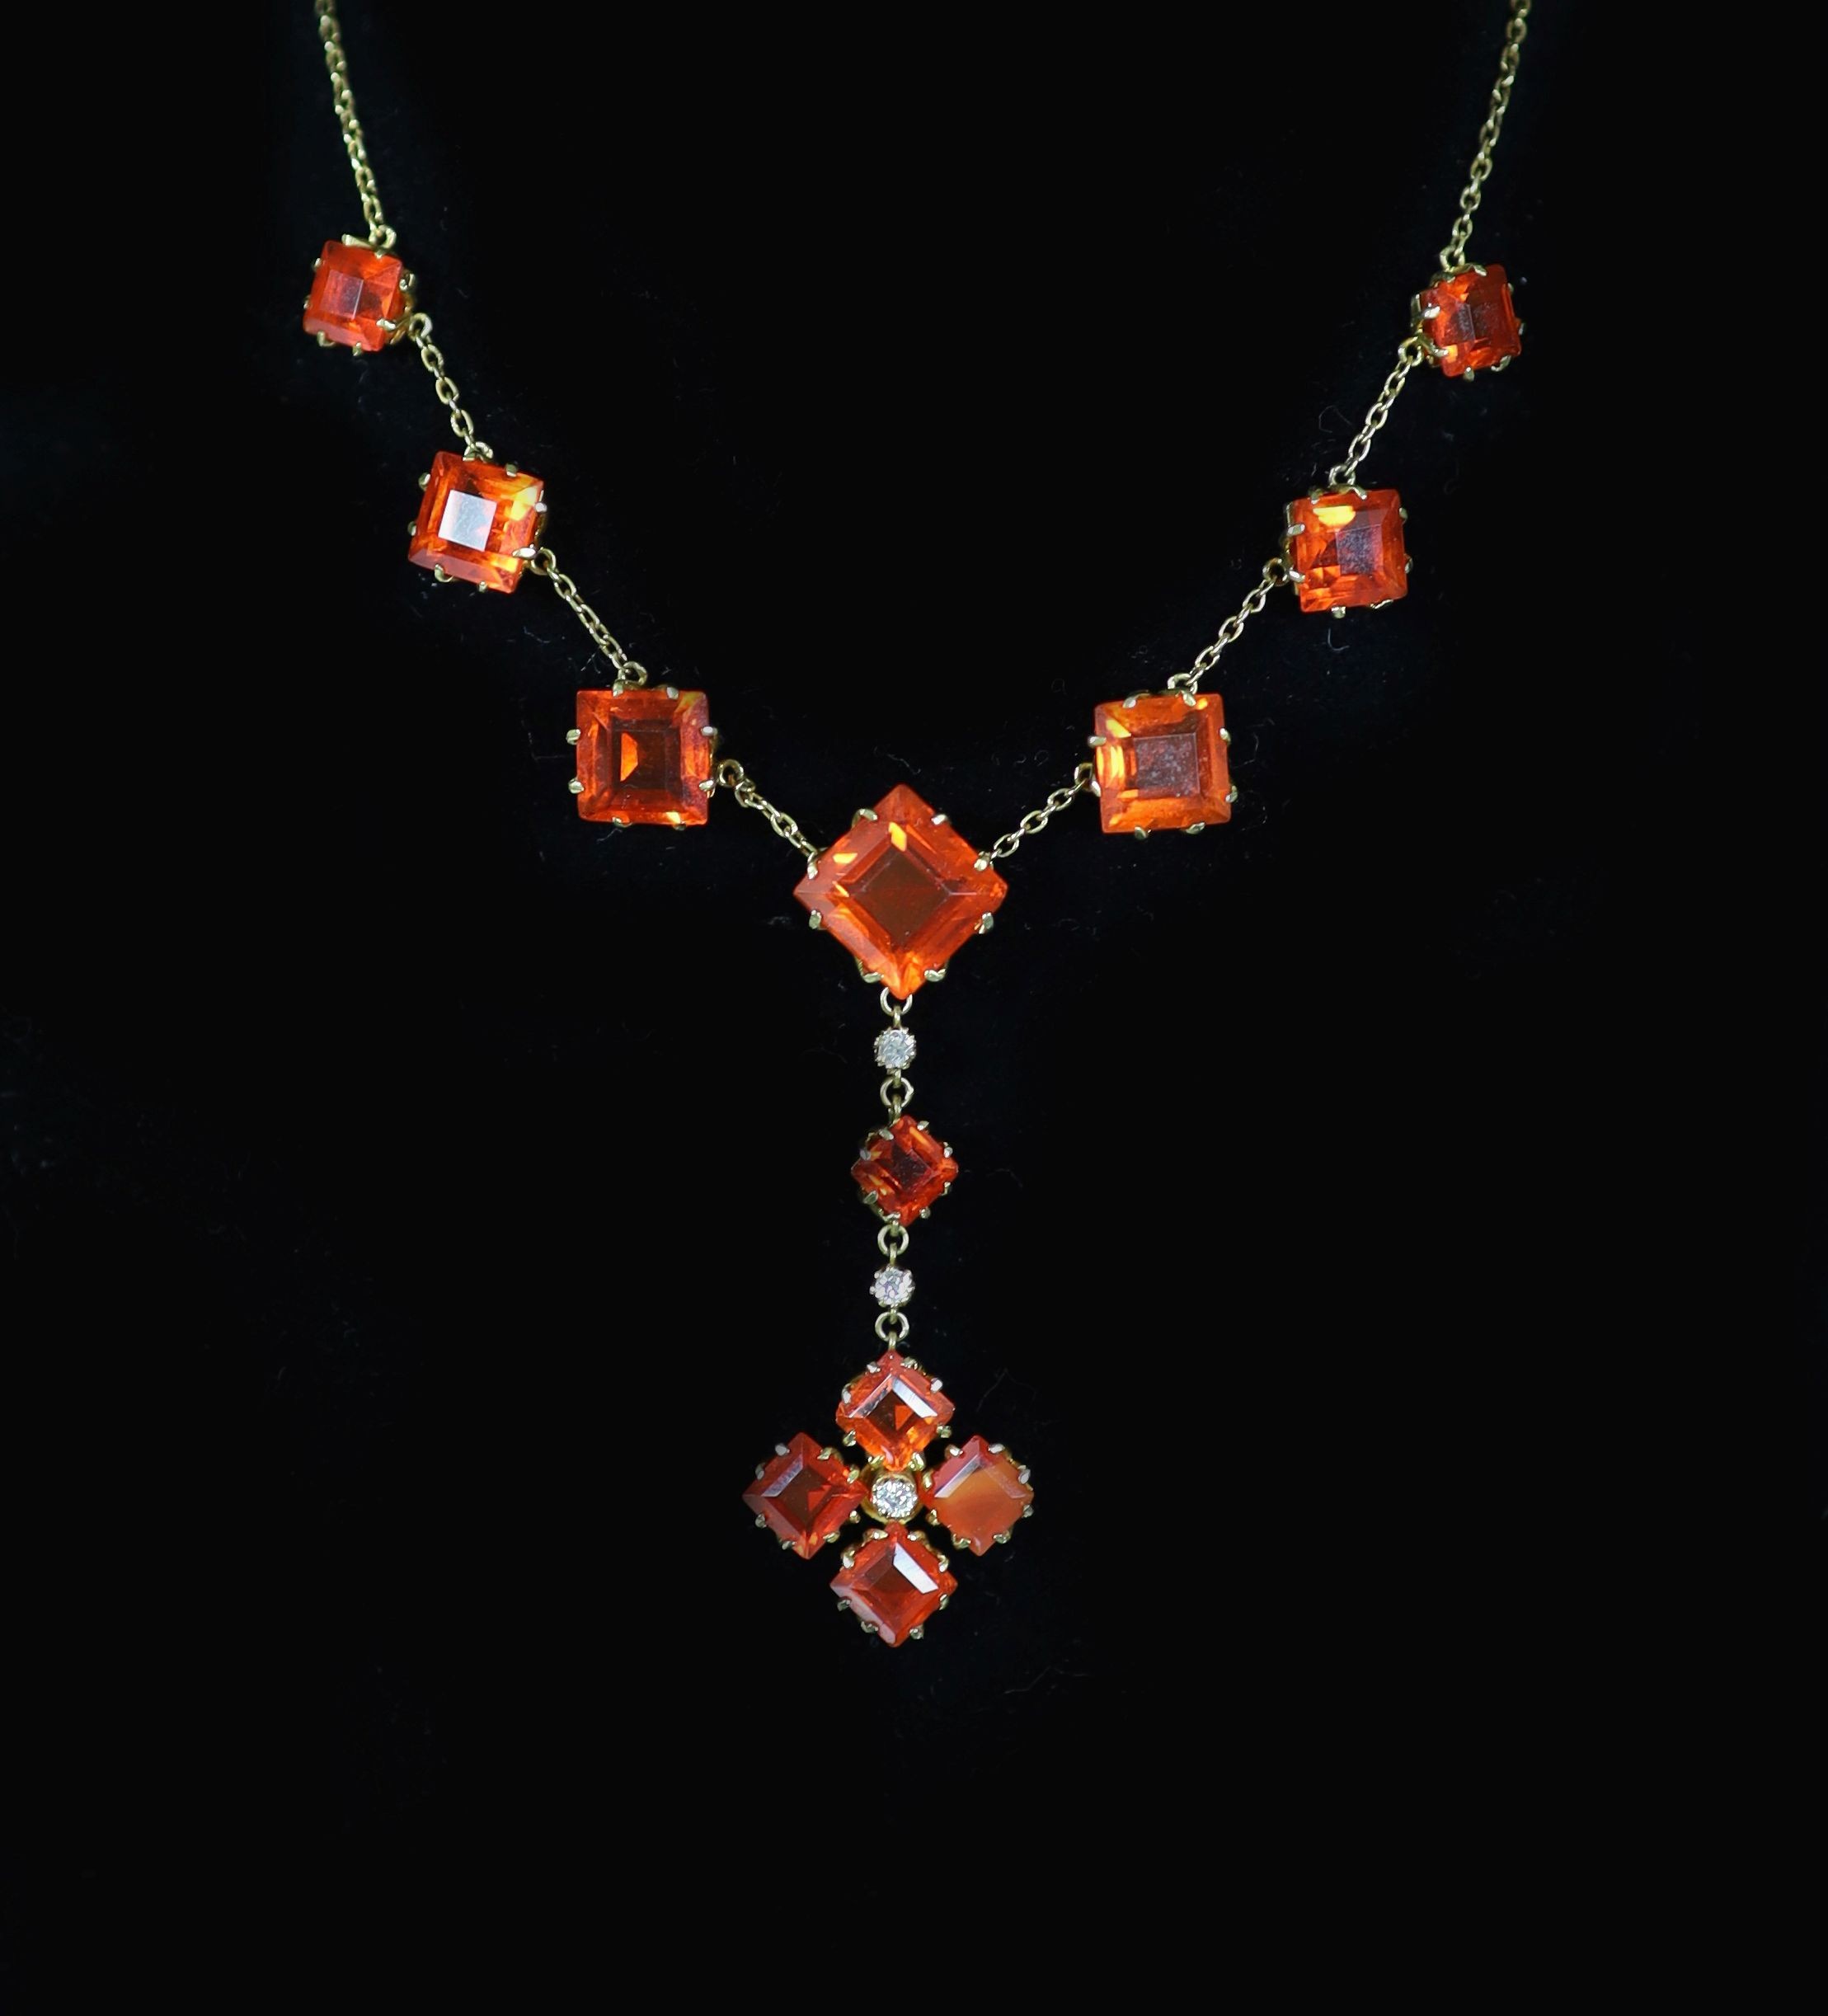 An early 20th century gold, fire opal and diamond drop necklace